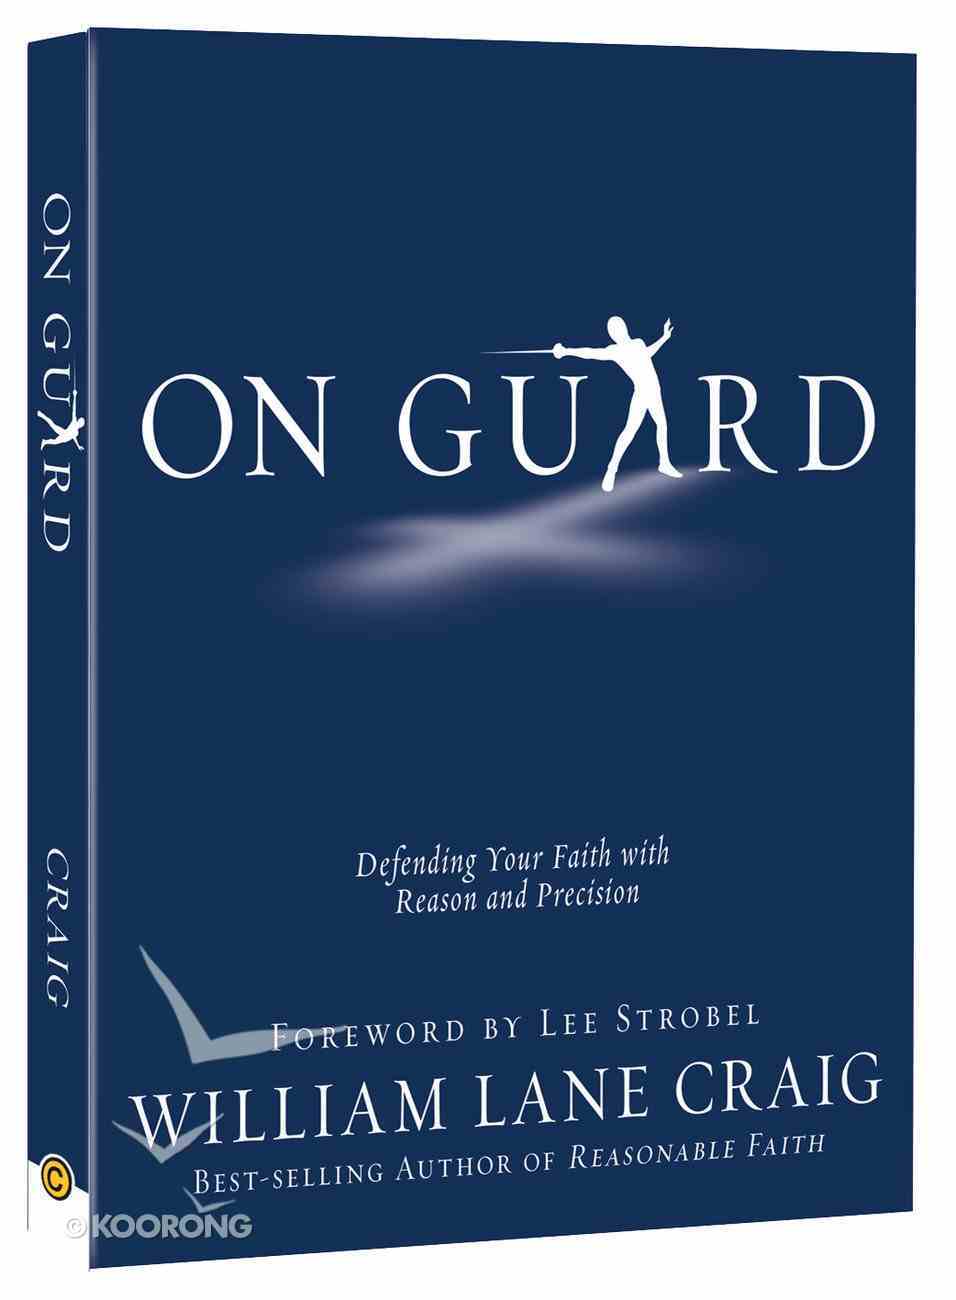 On Guard: Defending Your Faith With Reason and Precision Paperback